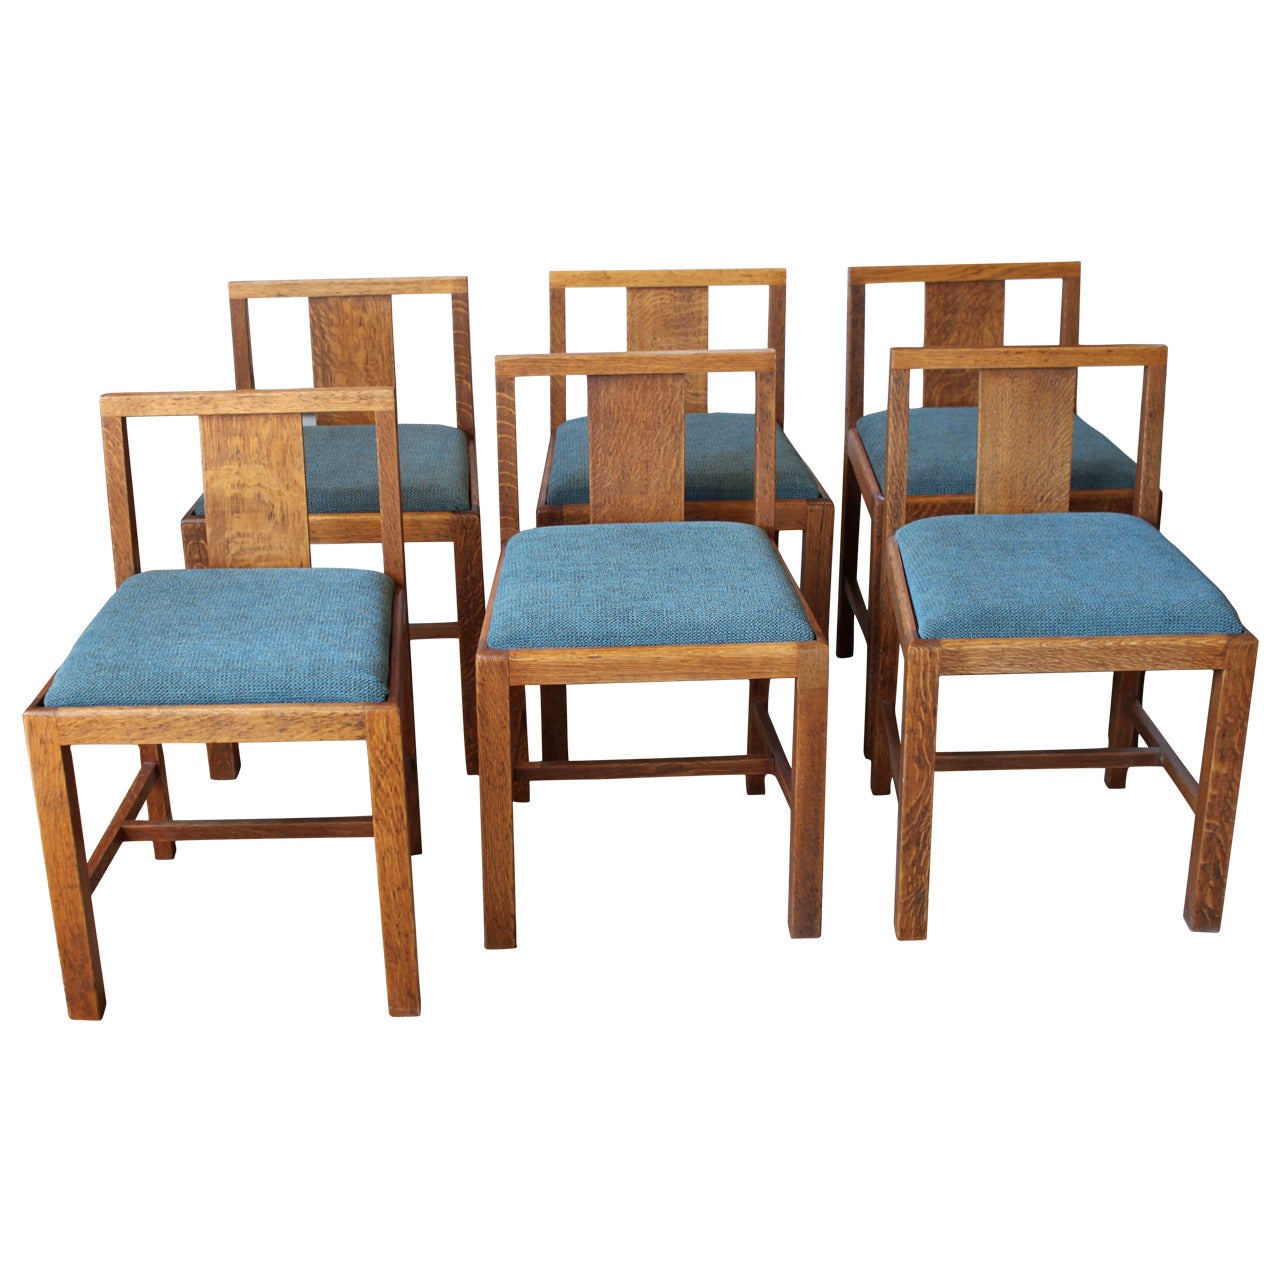 Early English Oak Chairs by Heals London For Sale